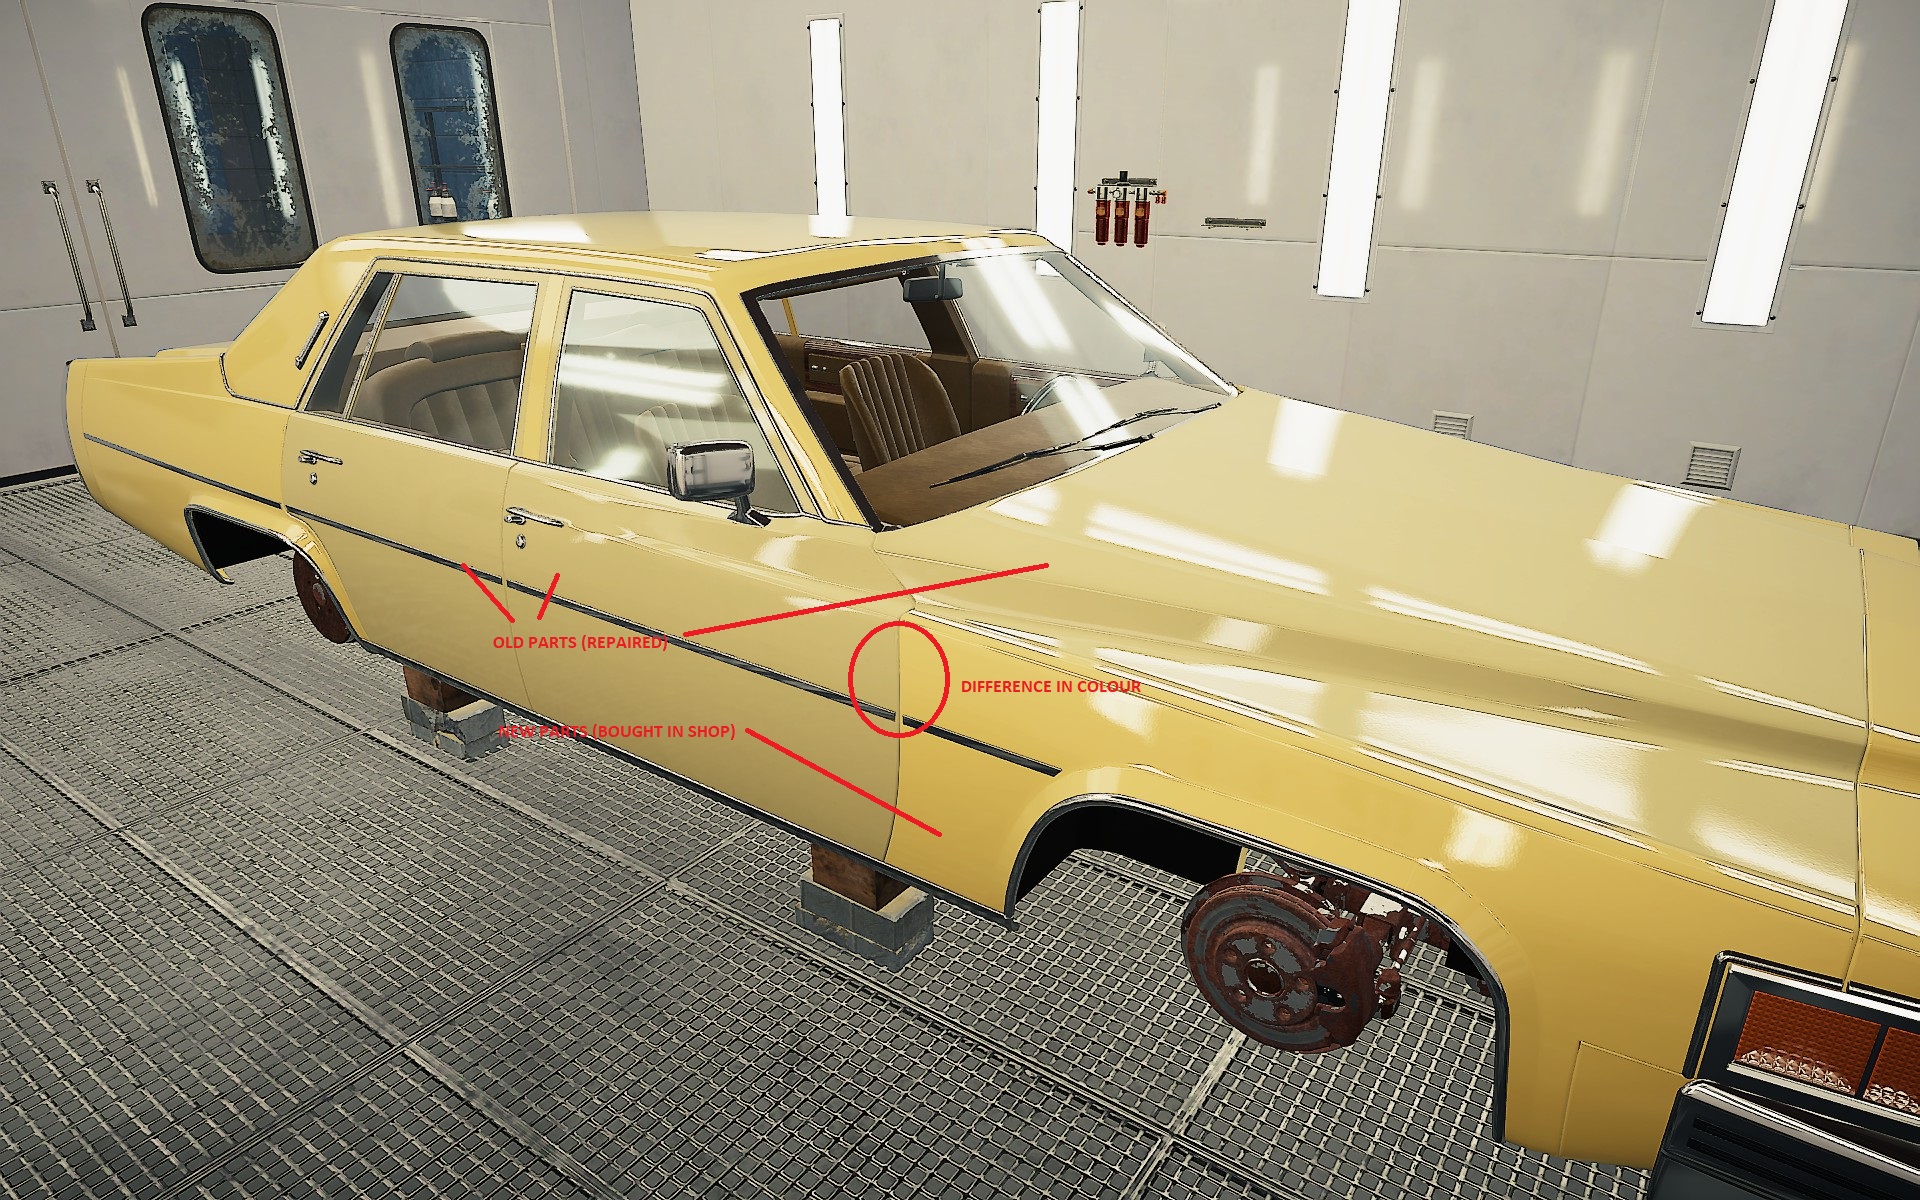 Painting a car with old and new parts image 1